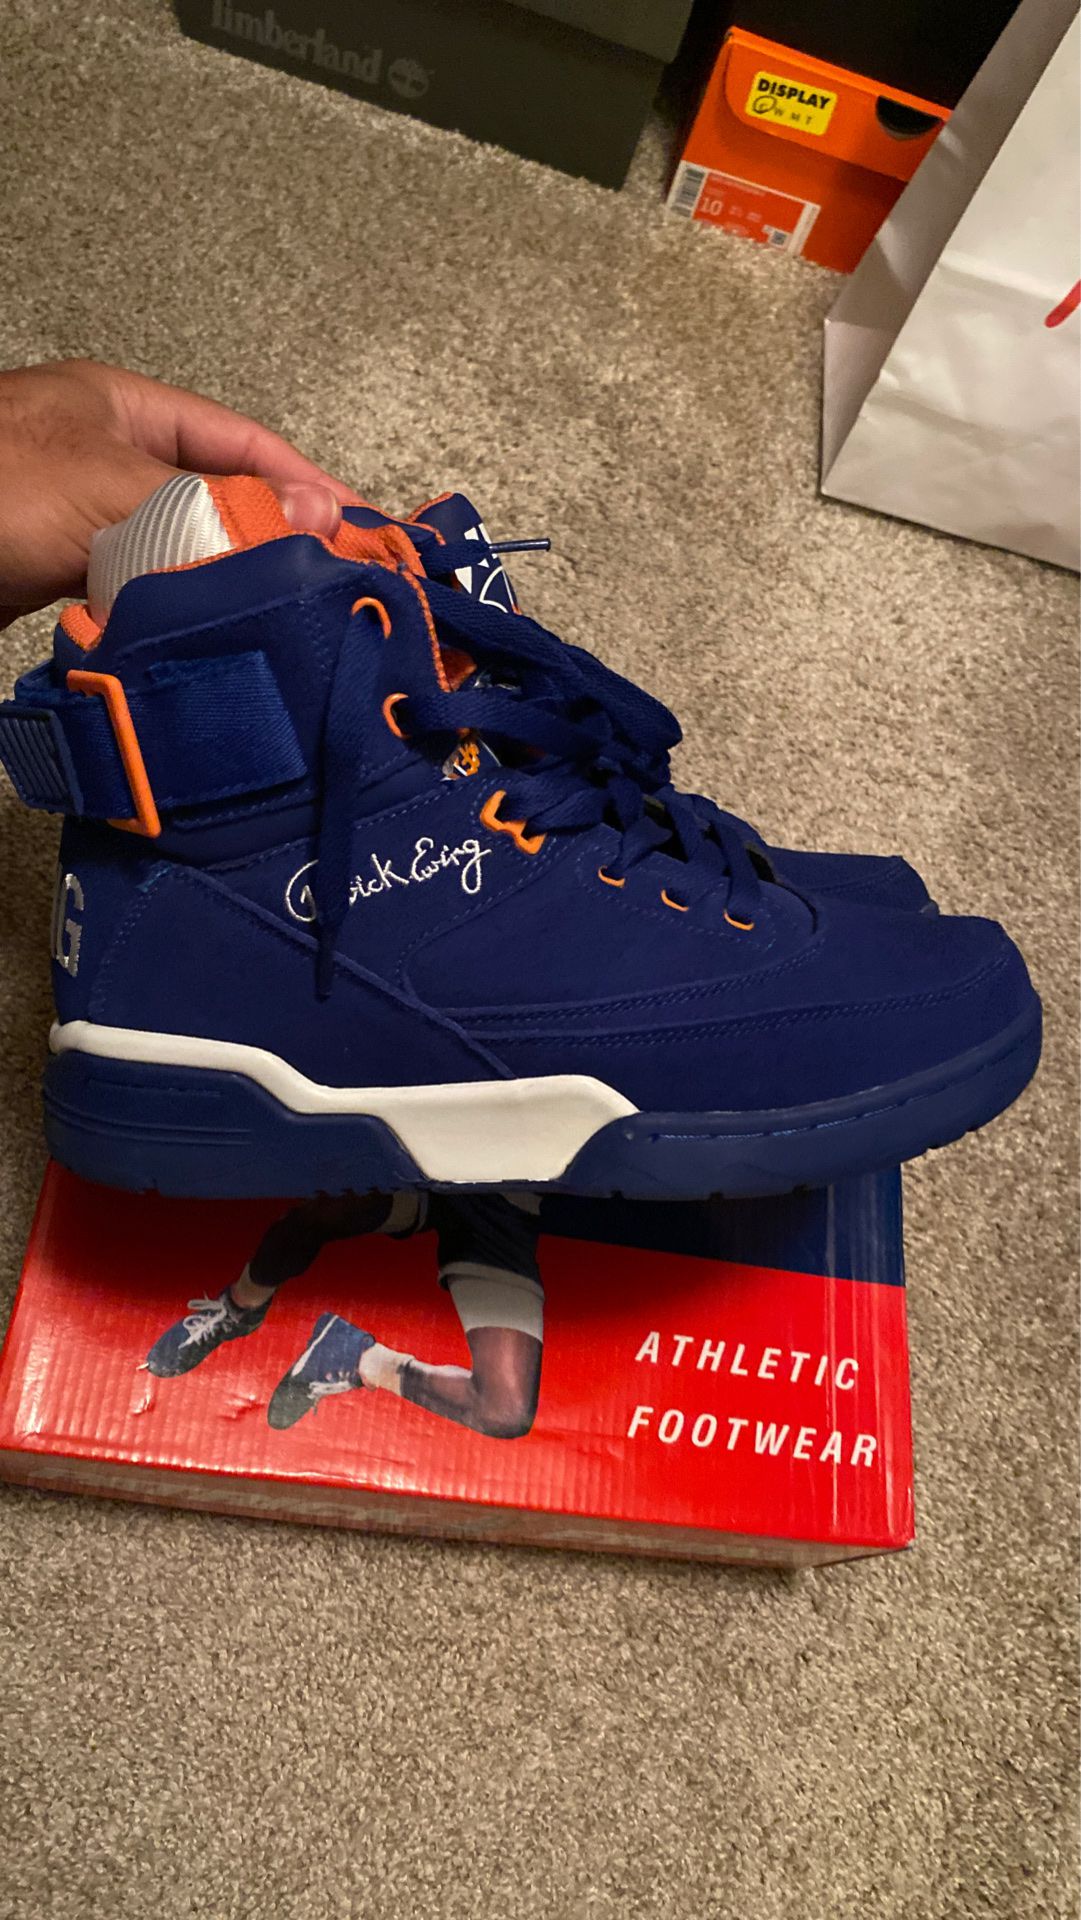 Ewing’s Size 9